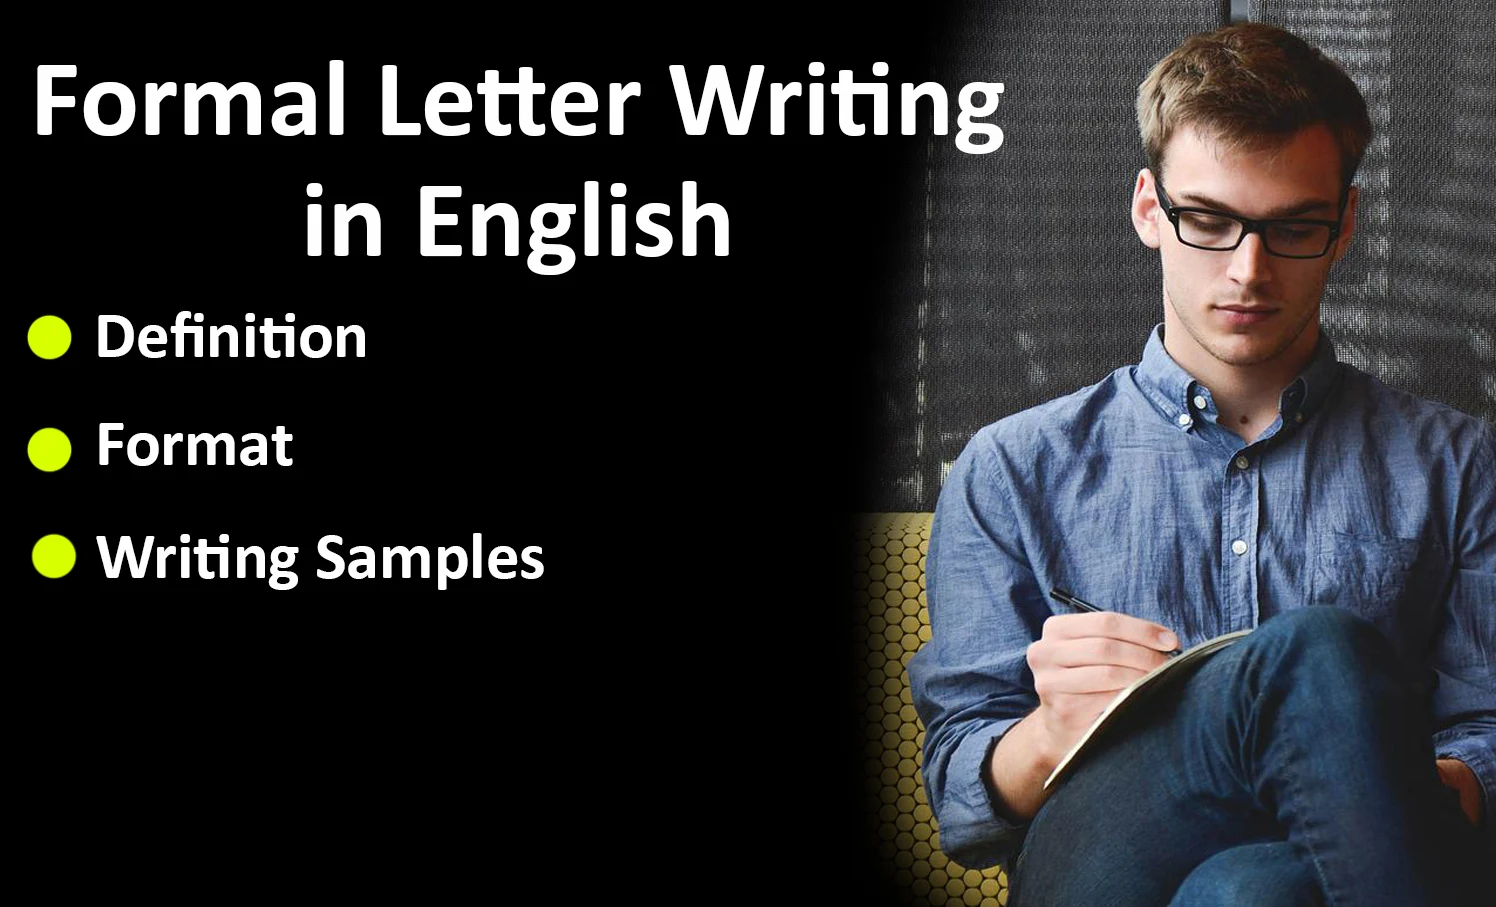 Formal Letter Writing Format in English - Definition, Format and Writing Samples